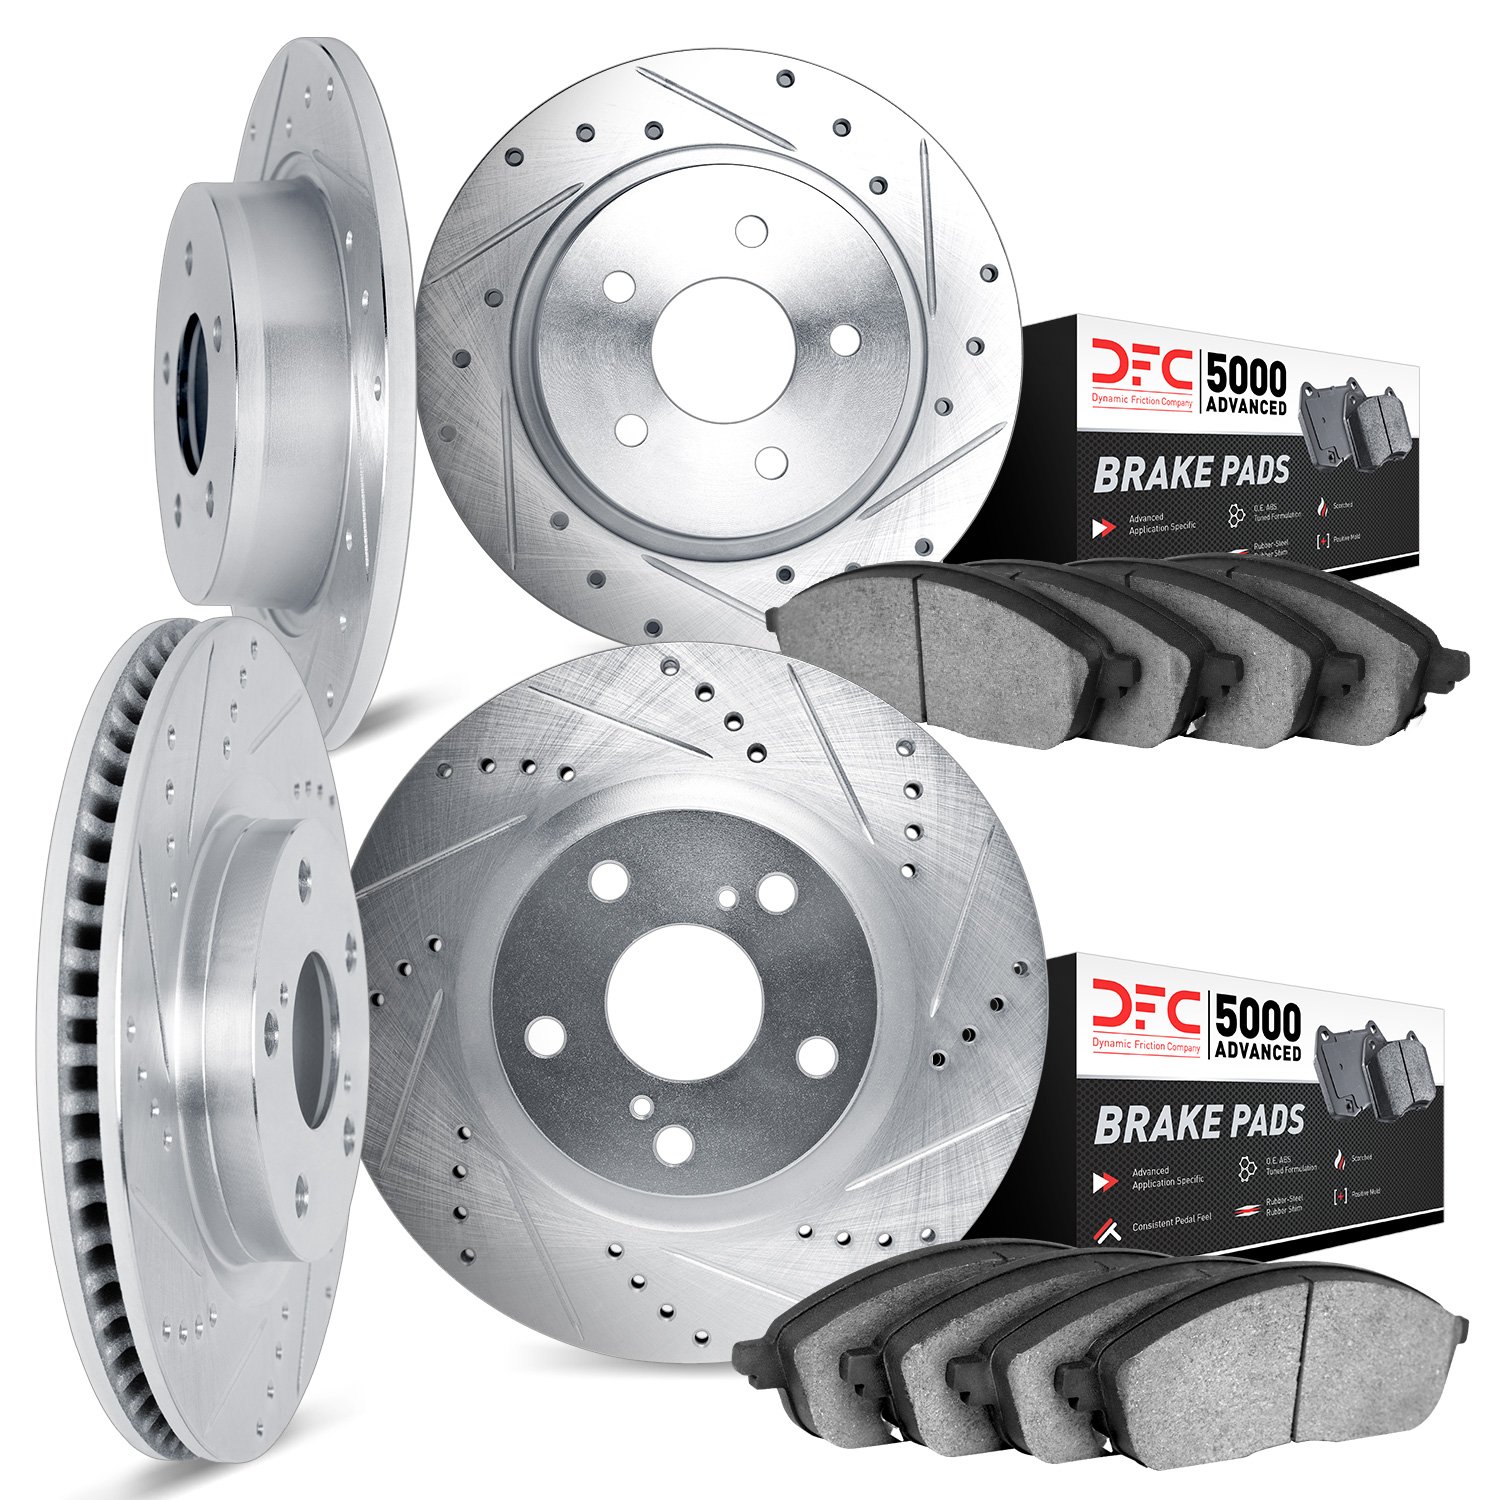 7504-54297 Drilled/Slotted Brake Rotors w/5000 Advanced Brake Pads Kit [Silver], 2015-2019 Ford/Lincoln/Mercury/Mazda, Position: